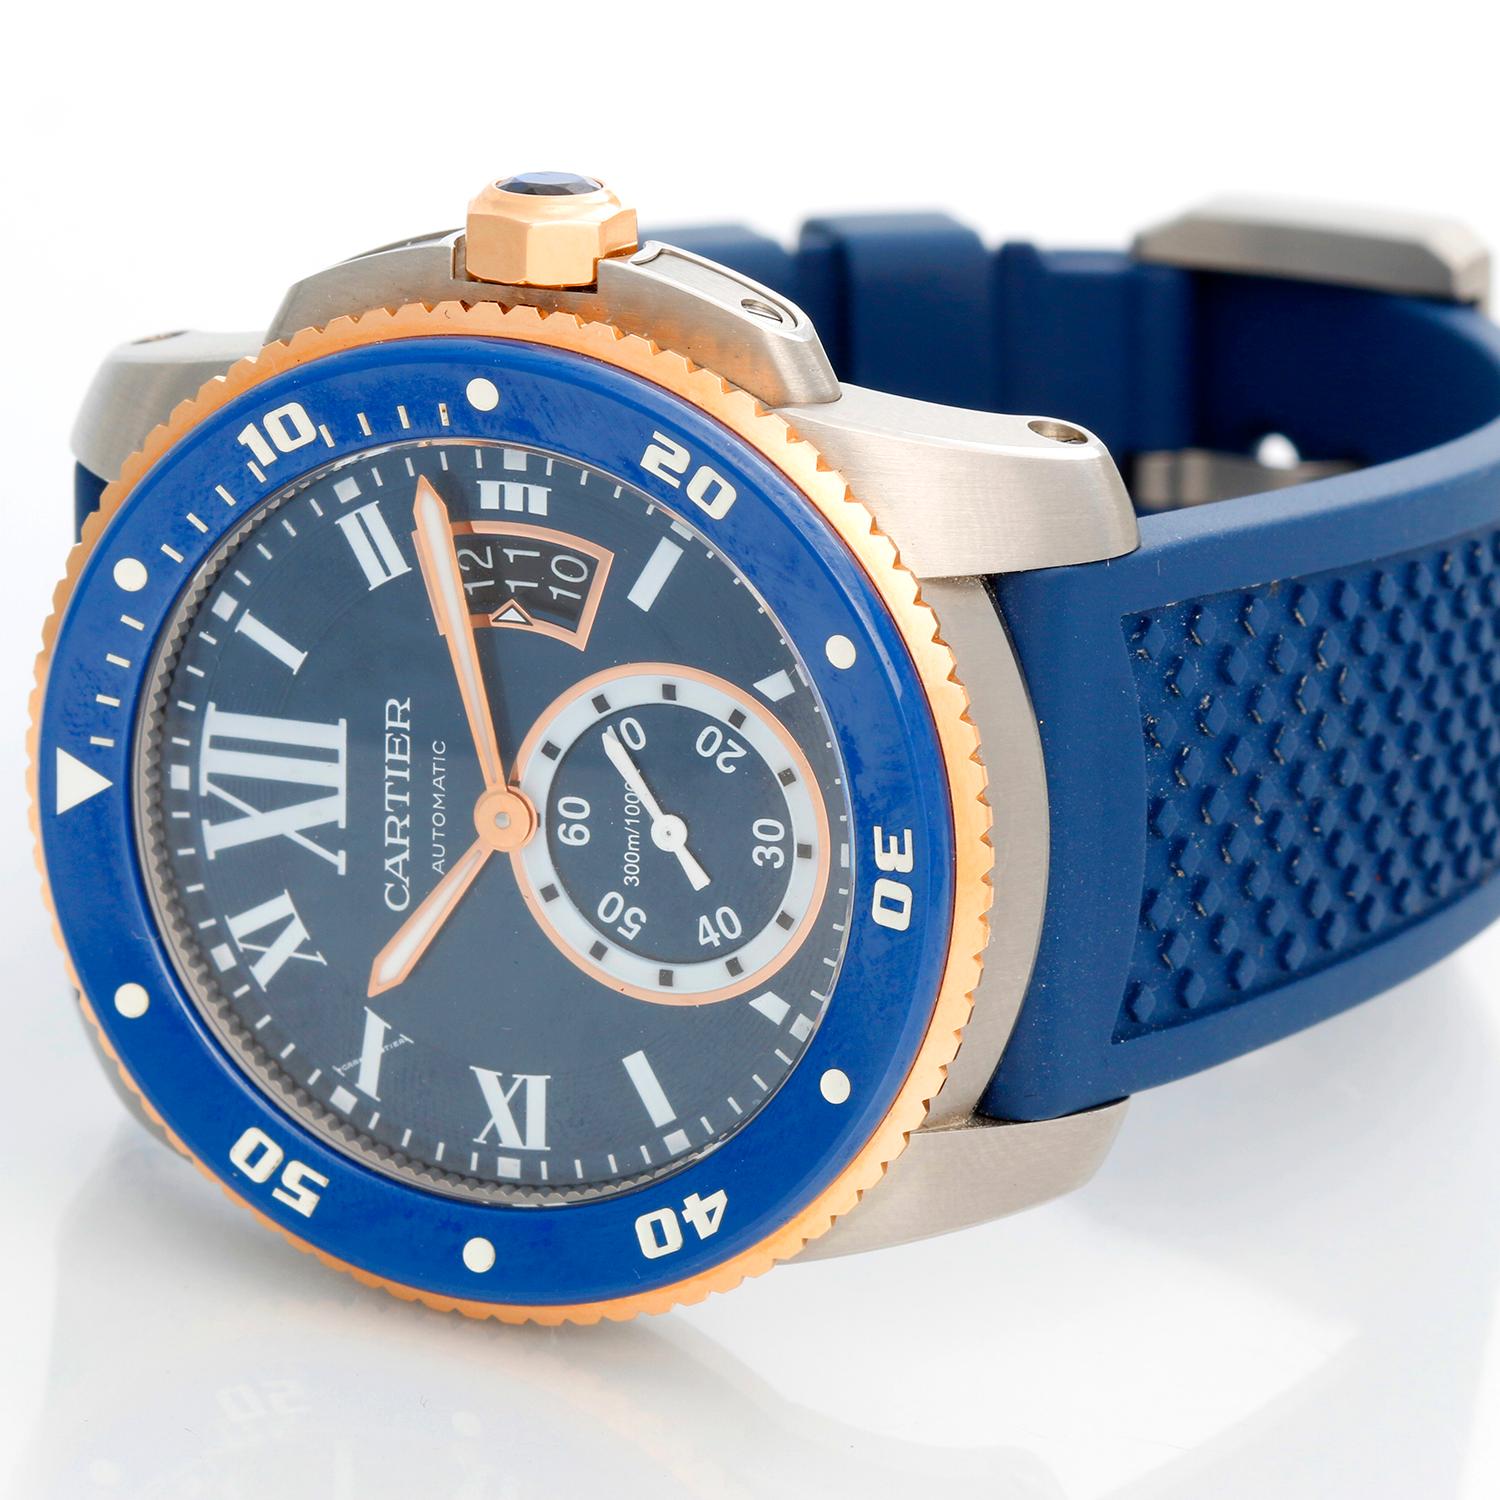 Calibre de Cartier Diver Men's Large 18k Rose Gold & Steel  Watch W2CA0009 - Automatic winding with date. Stainless steel case with 18K Rose gold and blue rotating bezel  (42mm diameter). Blue dial dial with white  Roman numerals and stick markers;